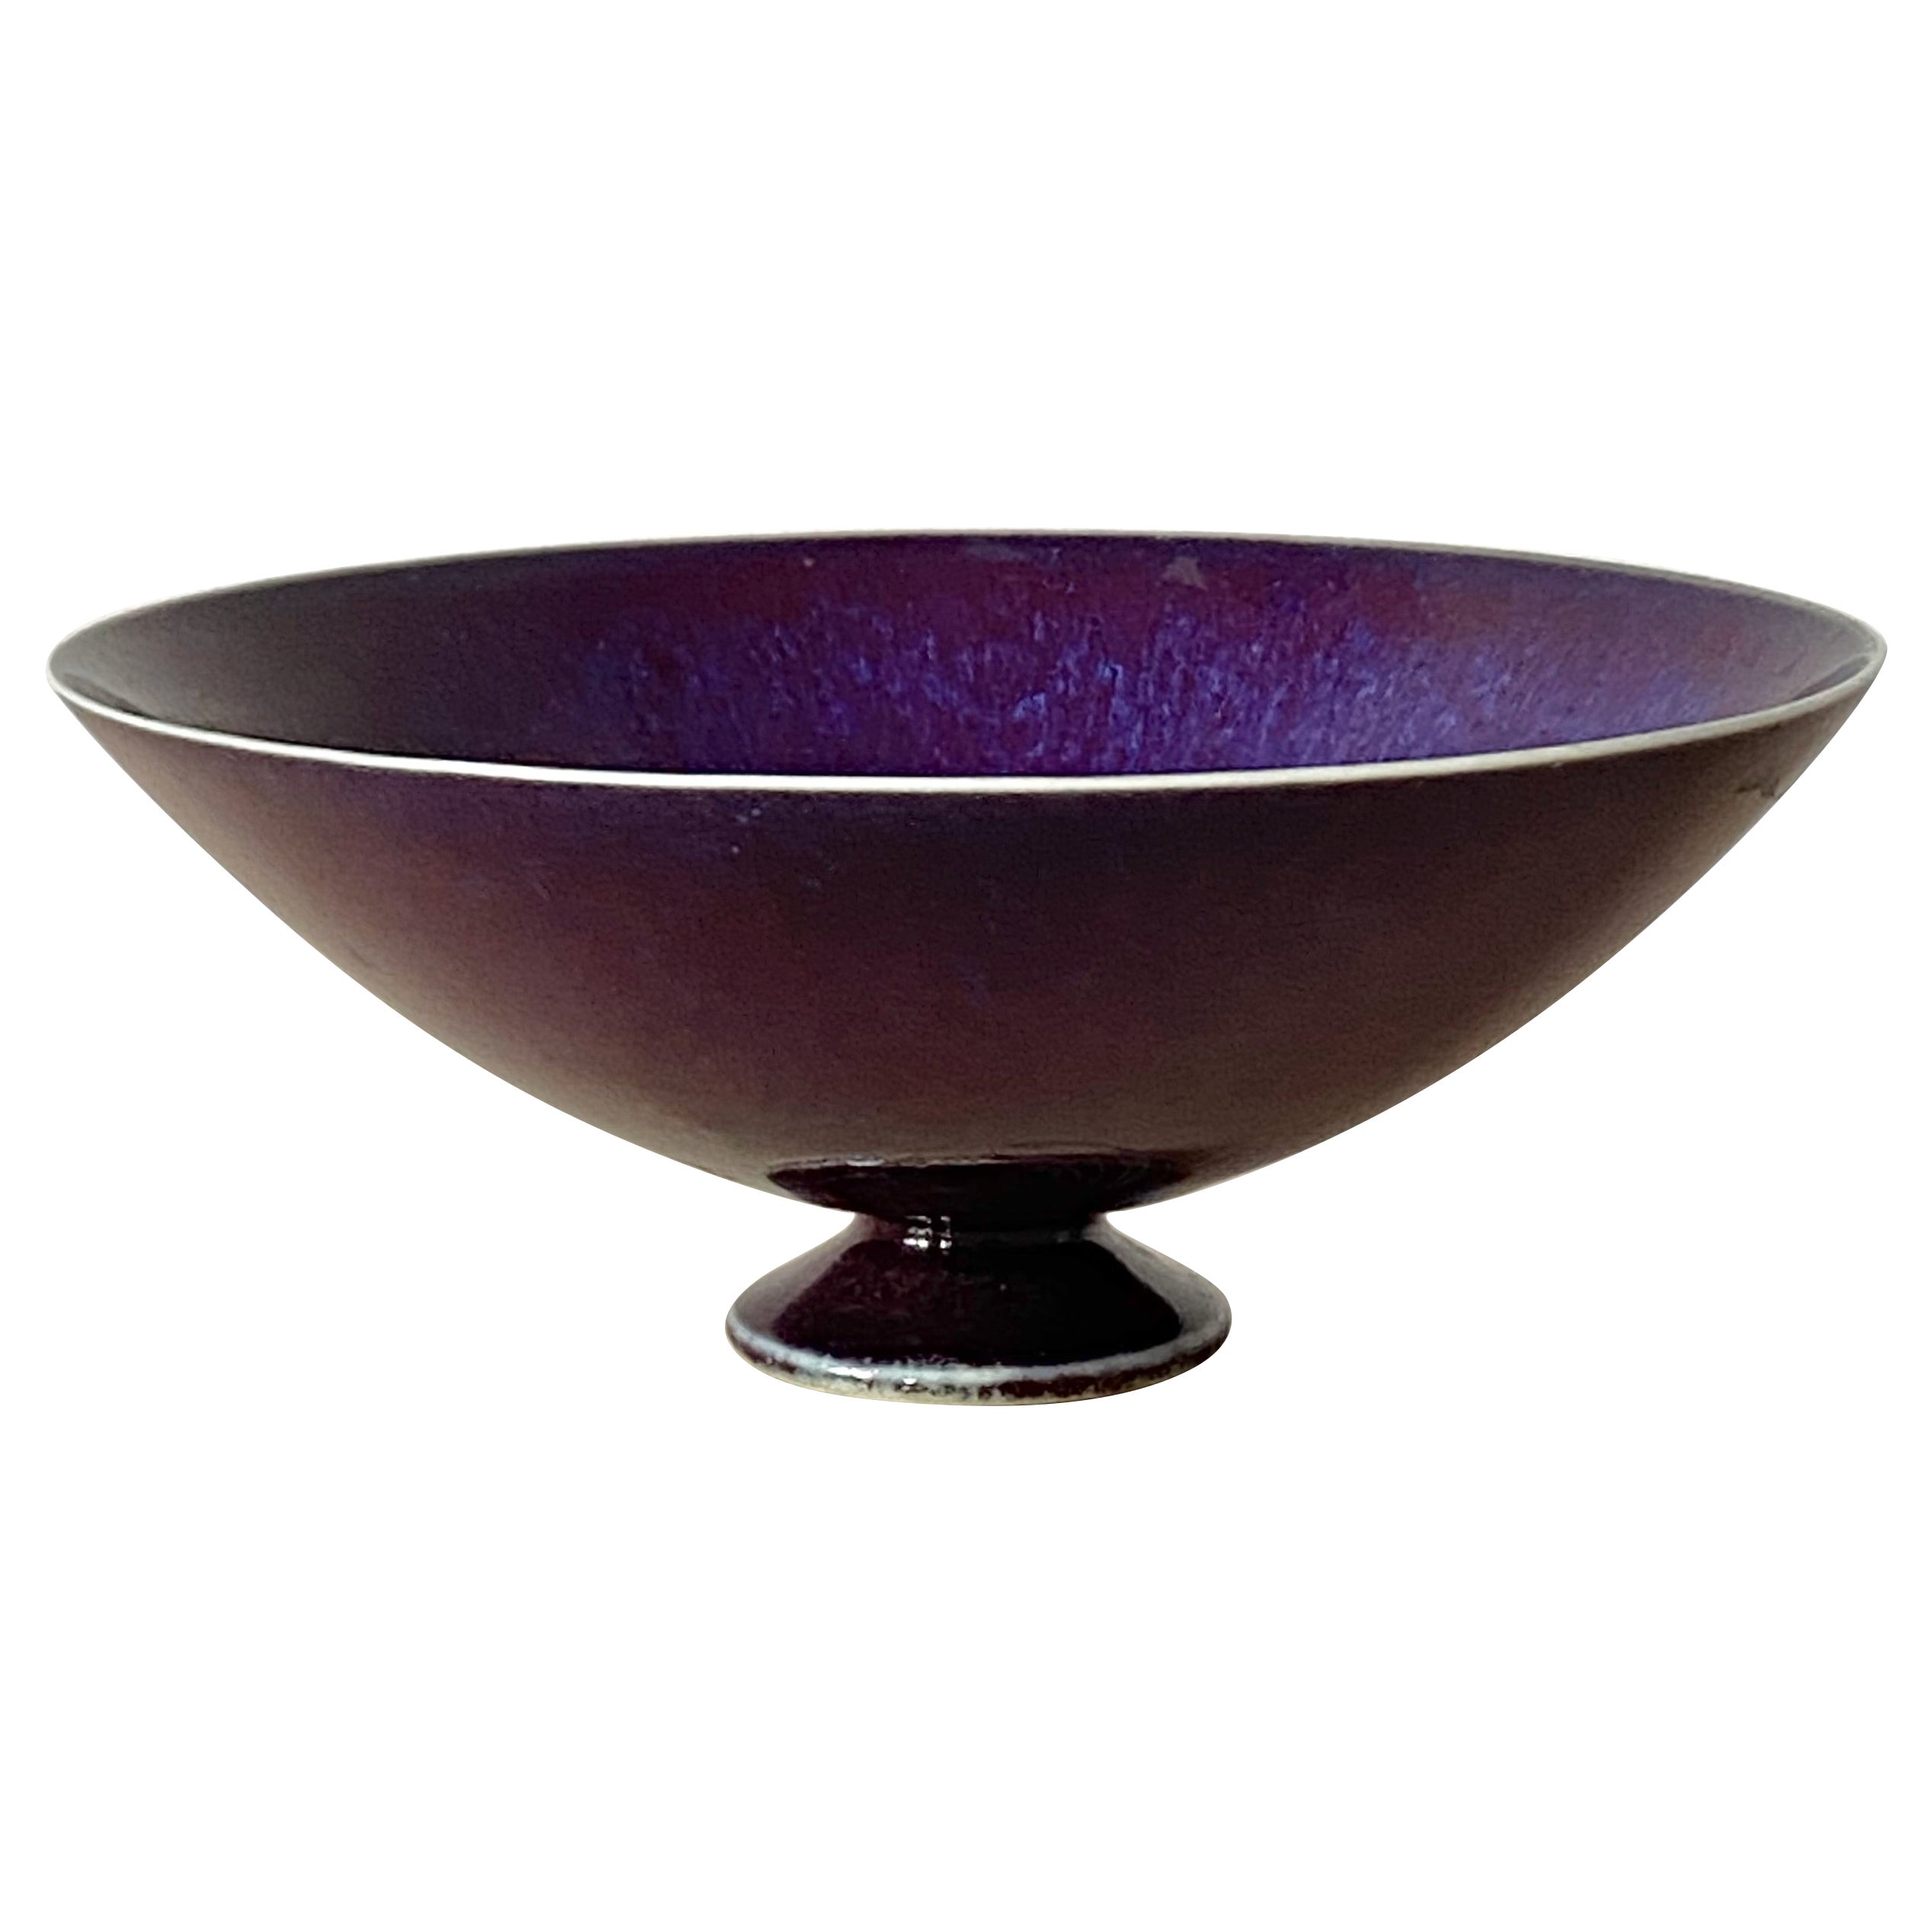 Small Blue and Red Stoneware Bowl by Sven Wejsfelt, Gustavsberg, Sweden, 1986